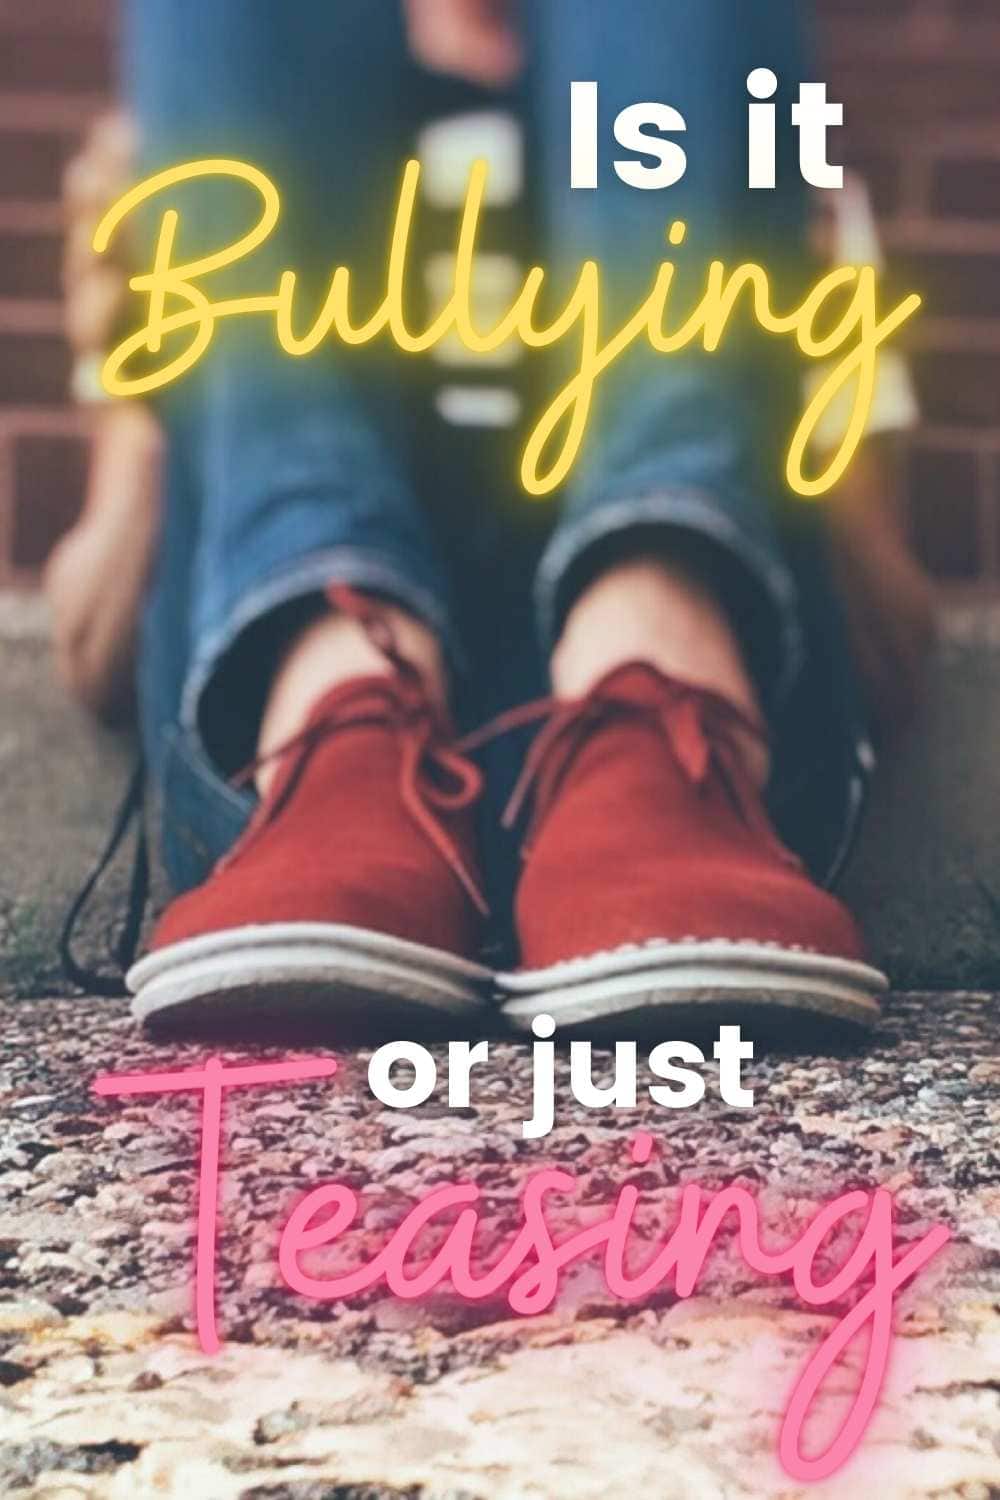 Bullying is a target word anymore.  Kids cry that they're being "bullied" even when it's harmless teasing.  How can you tell the difference and what do you do if your child is being bullied? via @pullingcurls